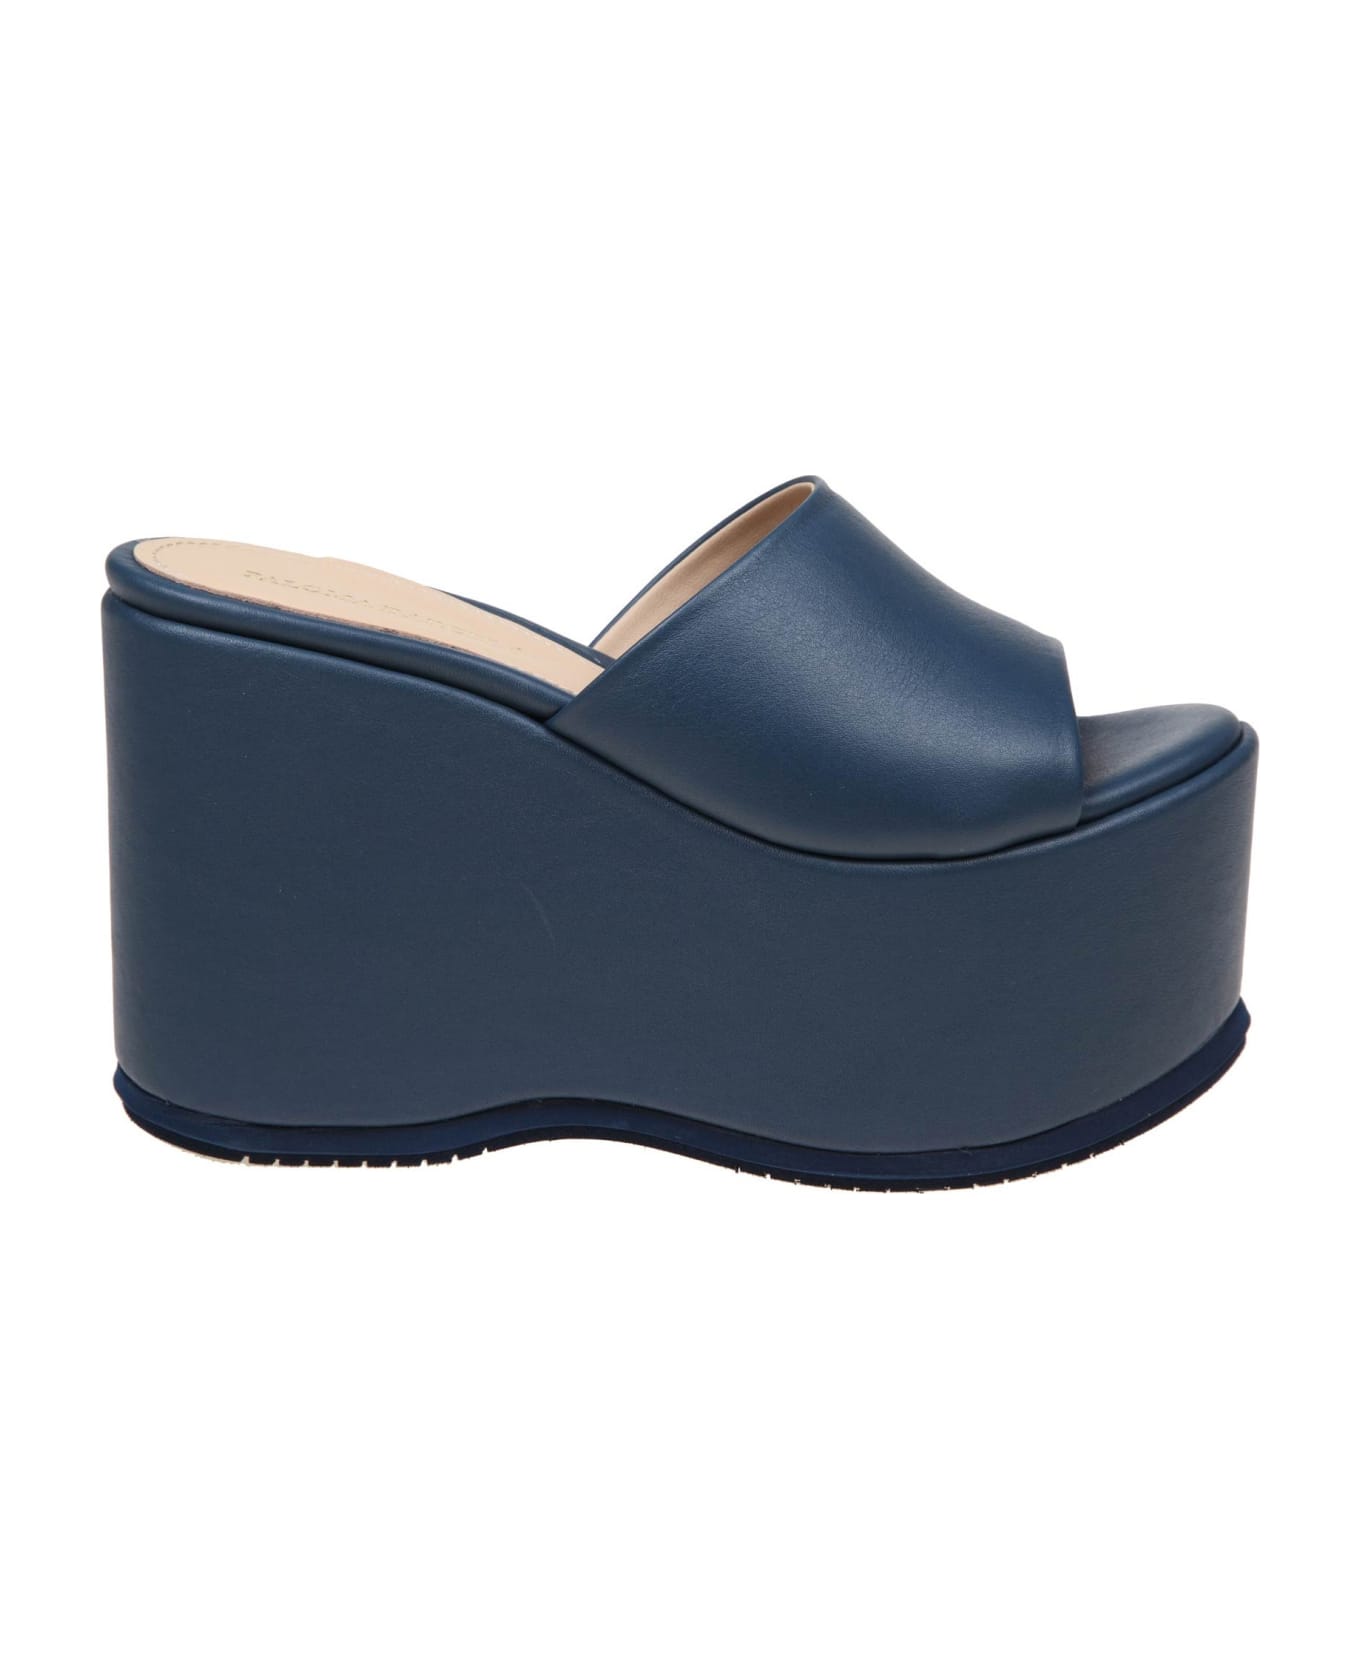 Paloma Barceló Hyana Mules In Blue Leather - Indigo